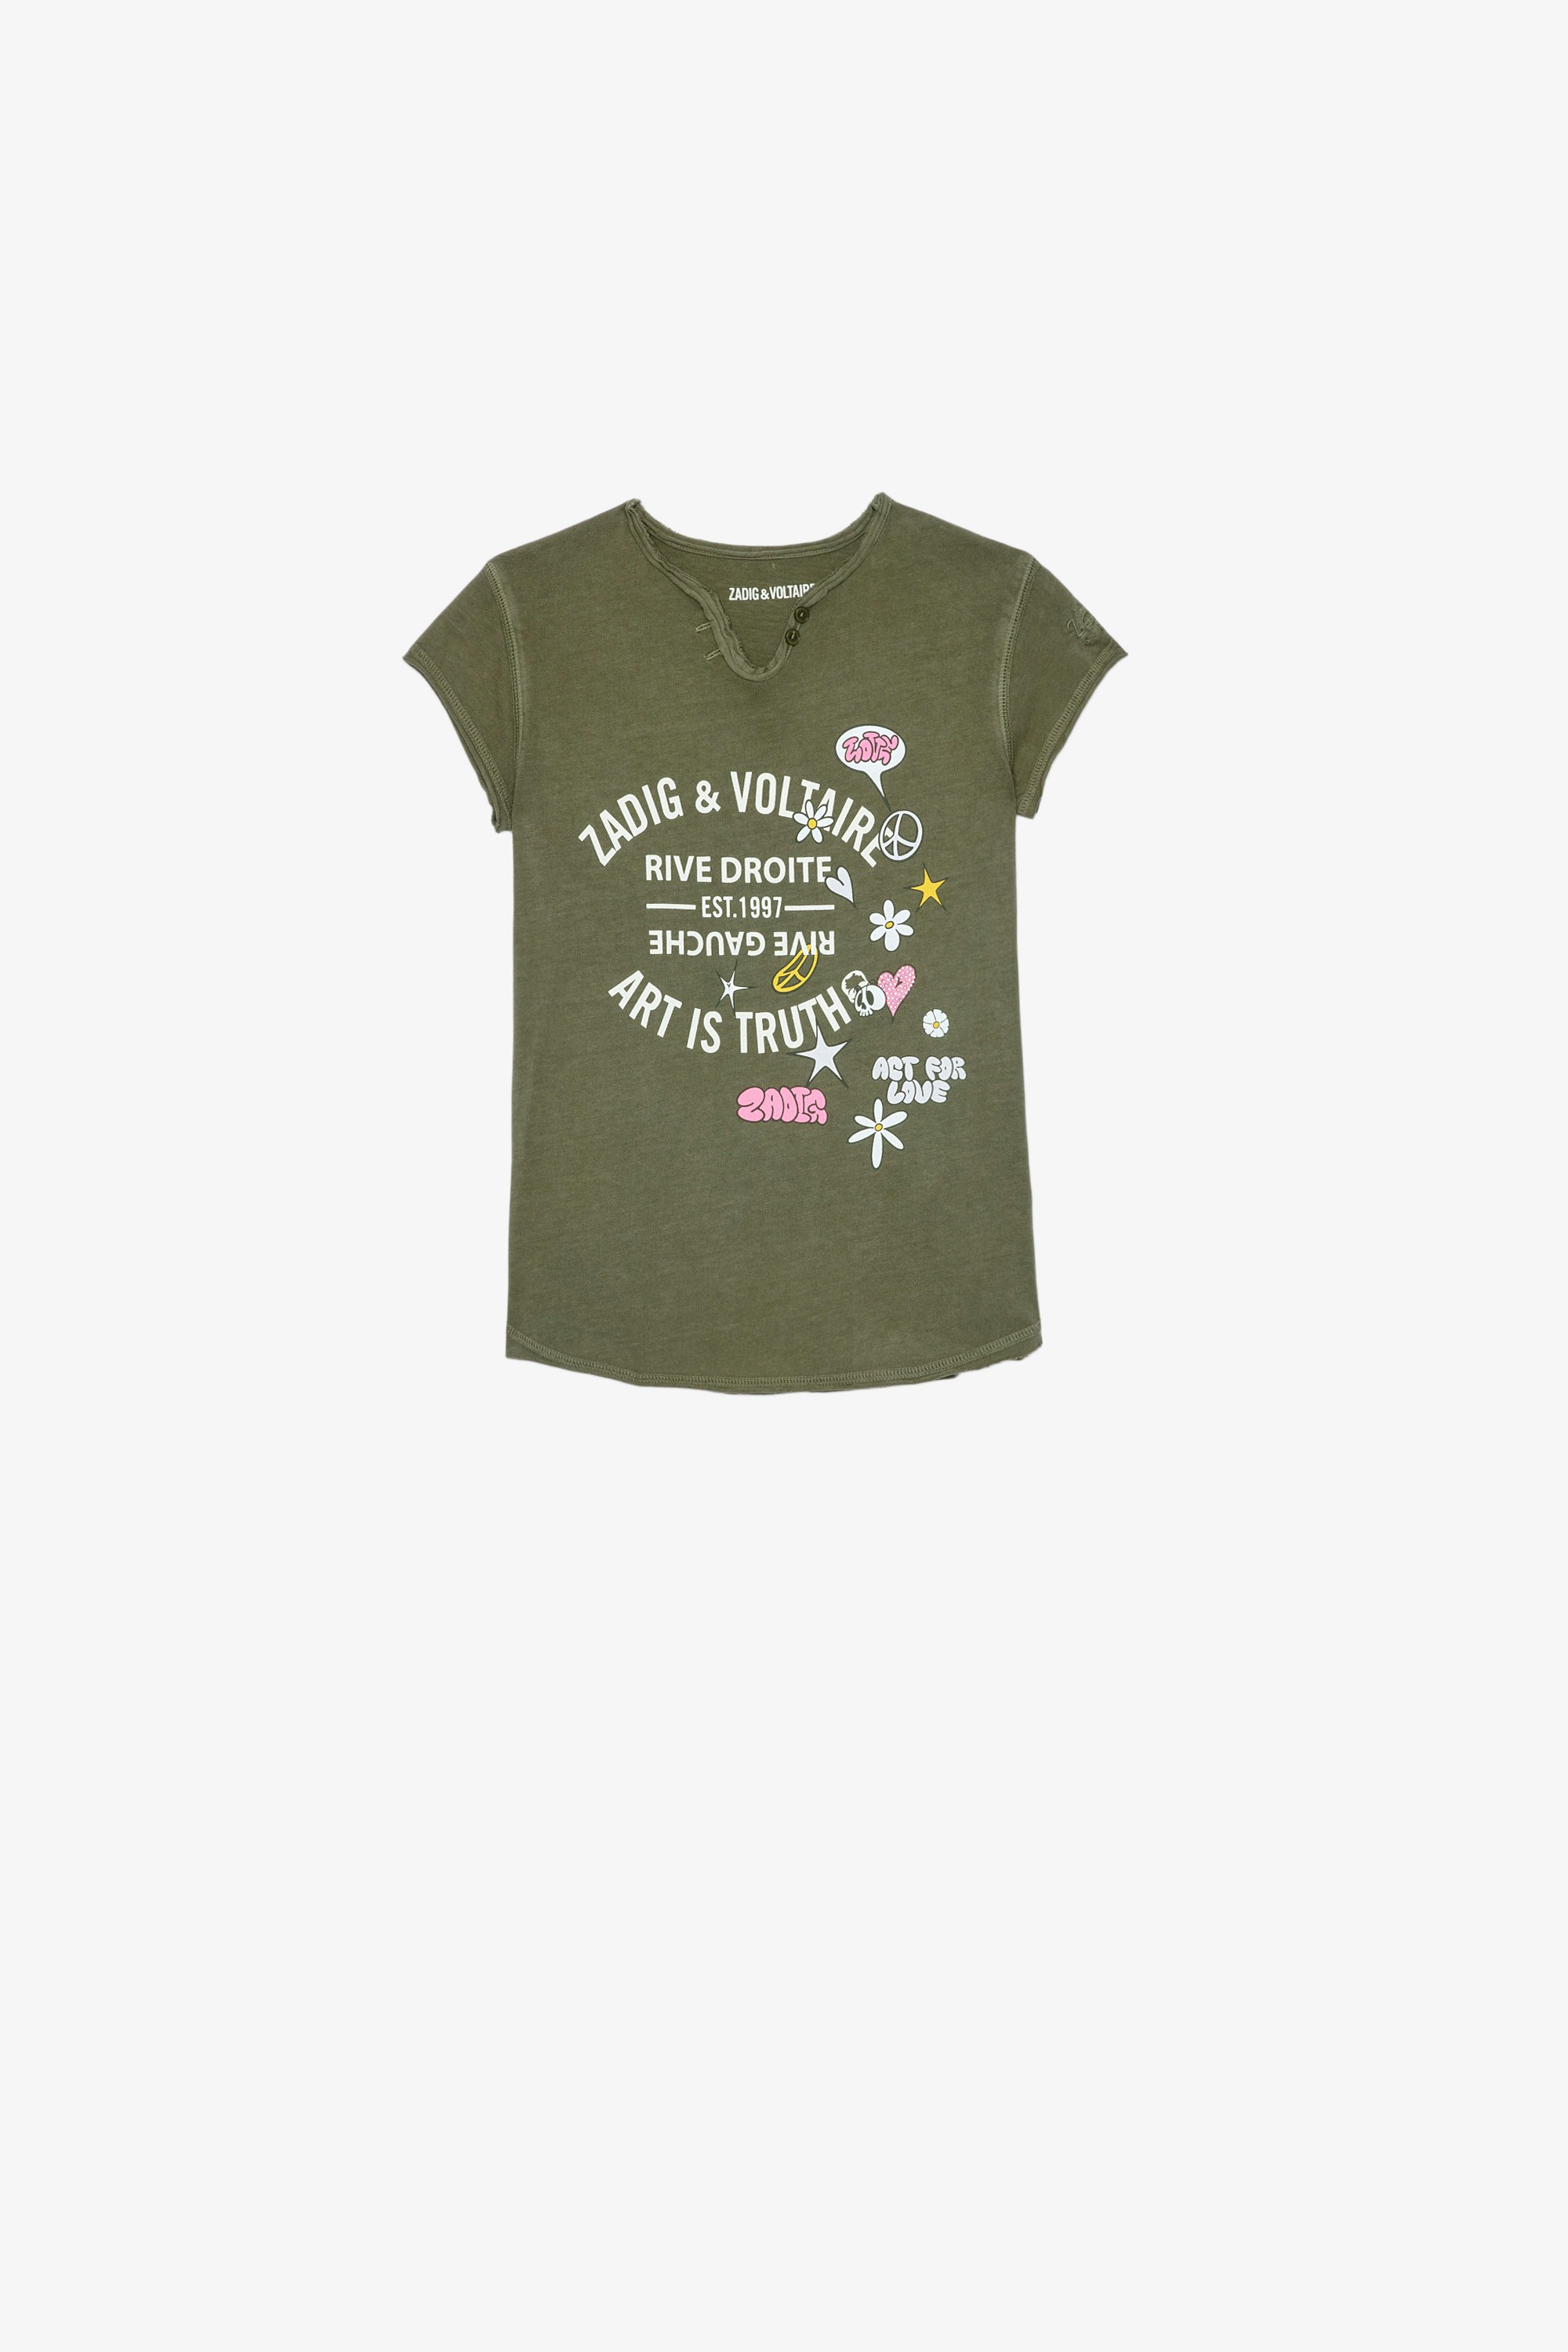 Boxo Kids' T-Shirt Kids’ T-shirt in khaki cotton jersey with a metallic-effect crystal-studded insignia and Core Cho embroidery